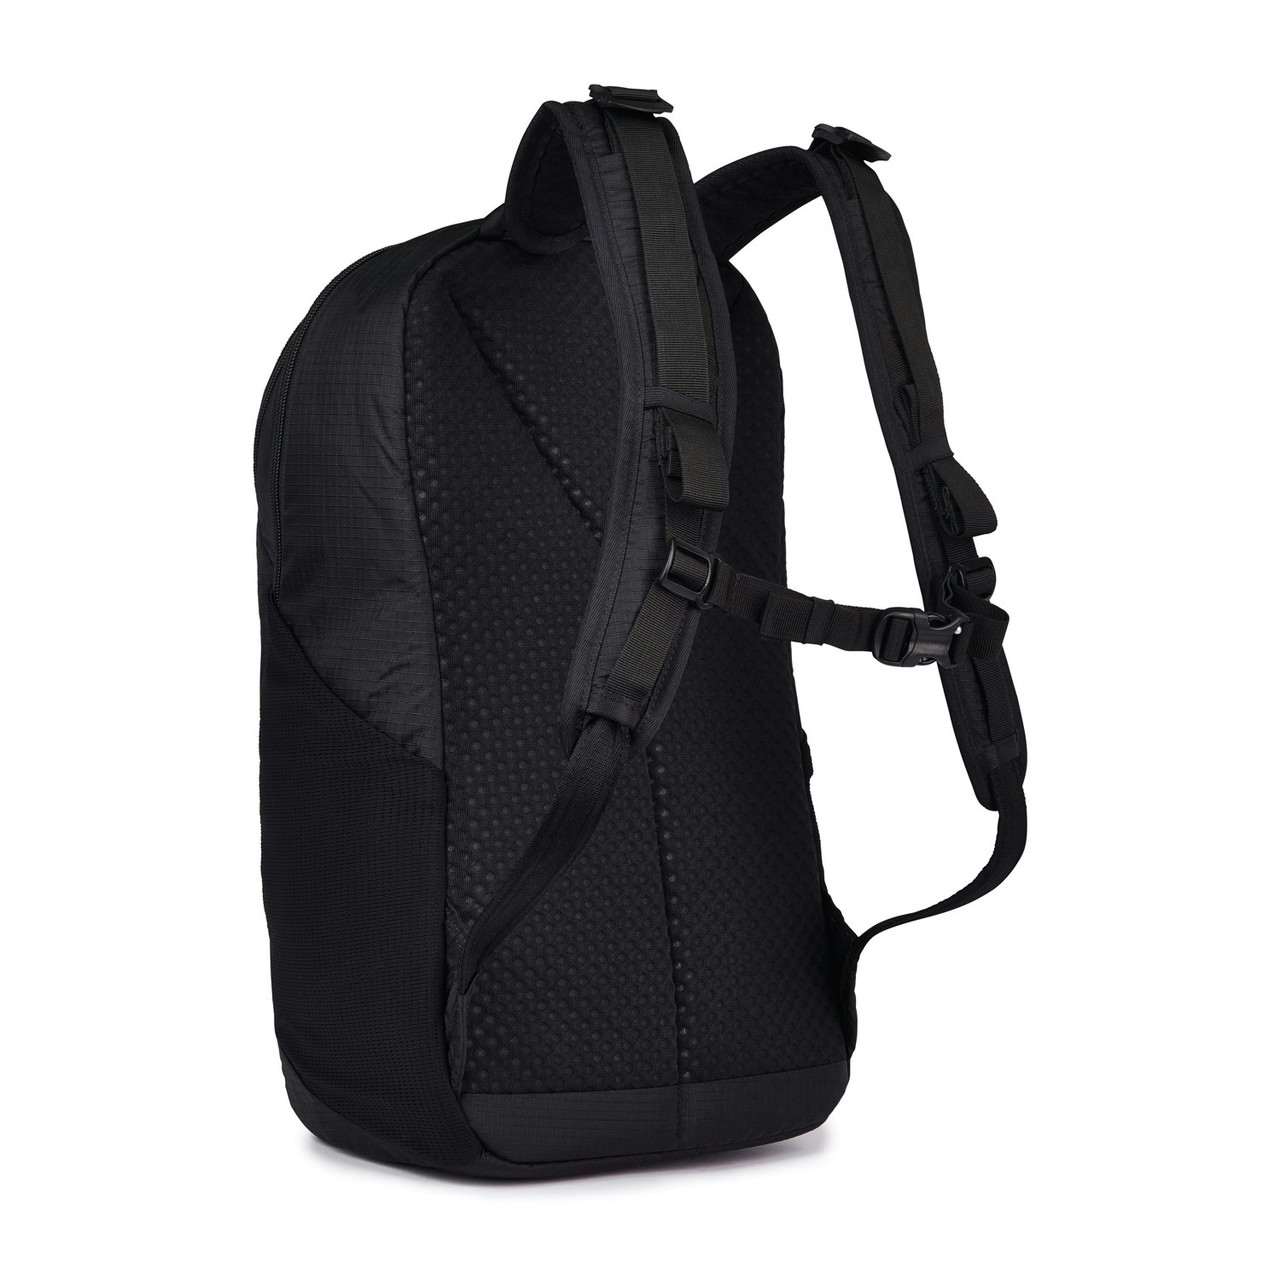 Vibe 20 Anti-Theft Backpack Black Ripstop